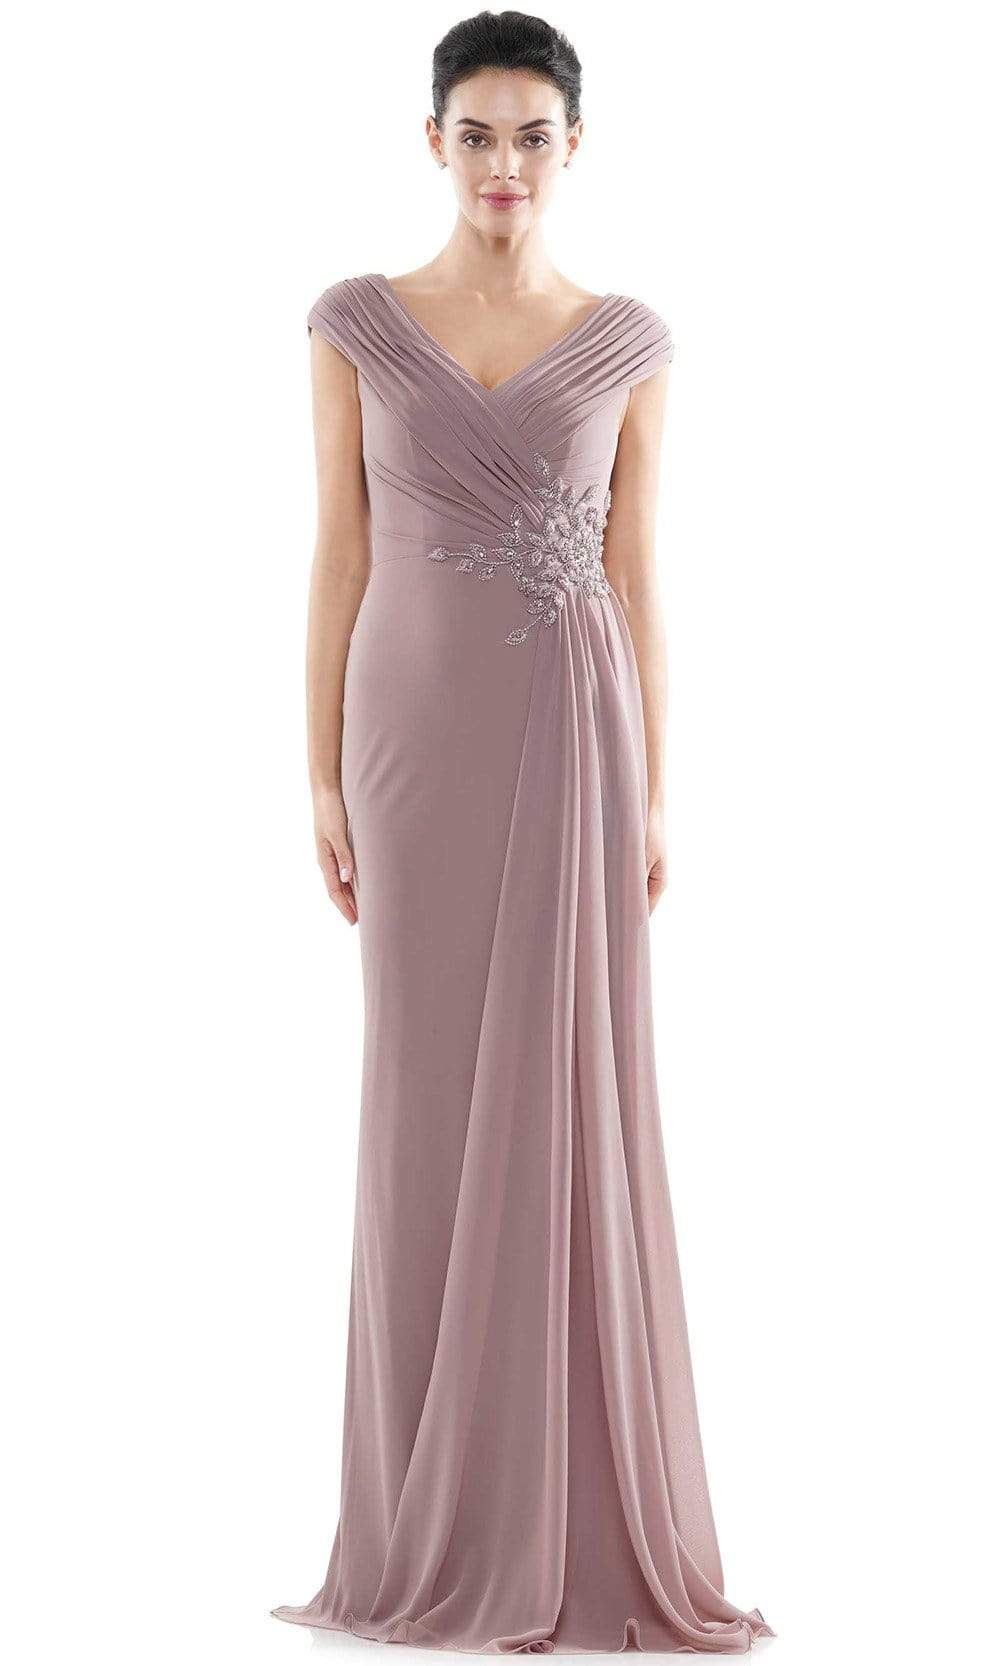 Marsoni by Colors - MV1080 Cap Sleeve Foliage Beaded Sheath Gown Mother of the Bride Dresses 4 / Mauve